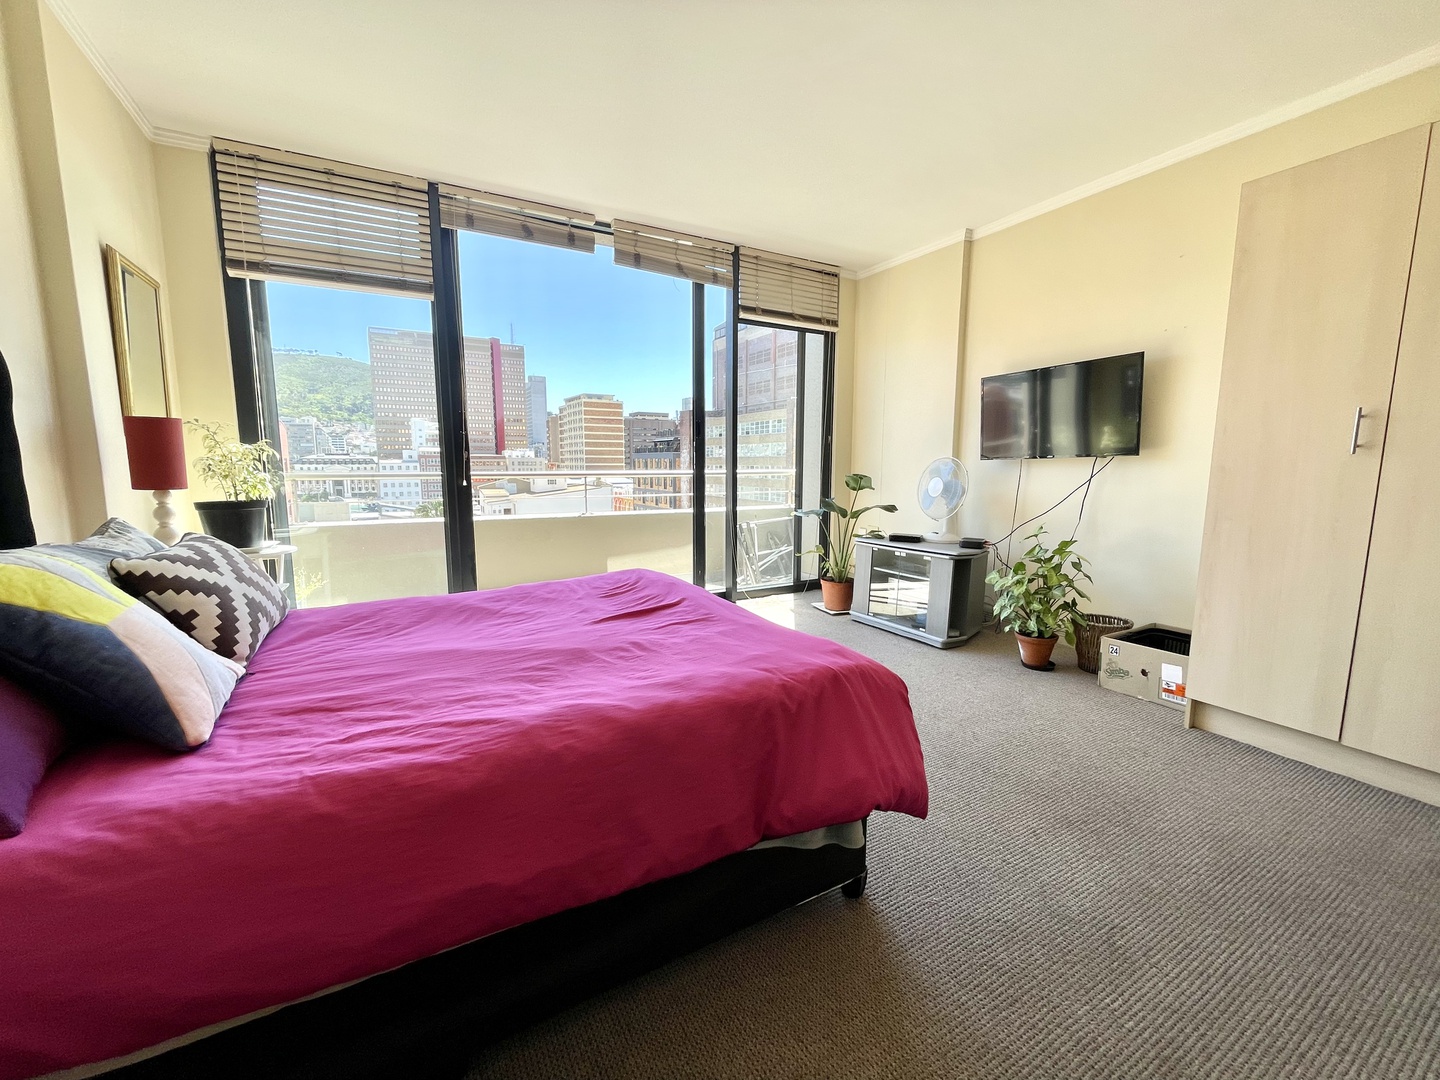 Apartment in Cape Town City Centre - Bedroom/Balcony/Living